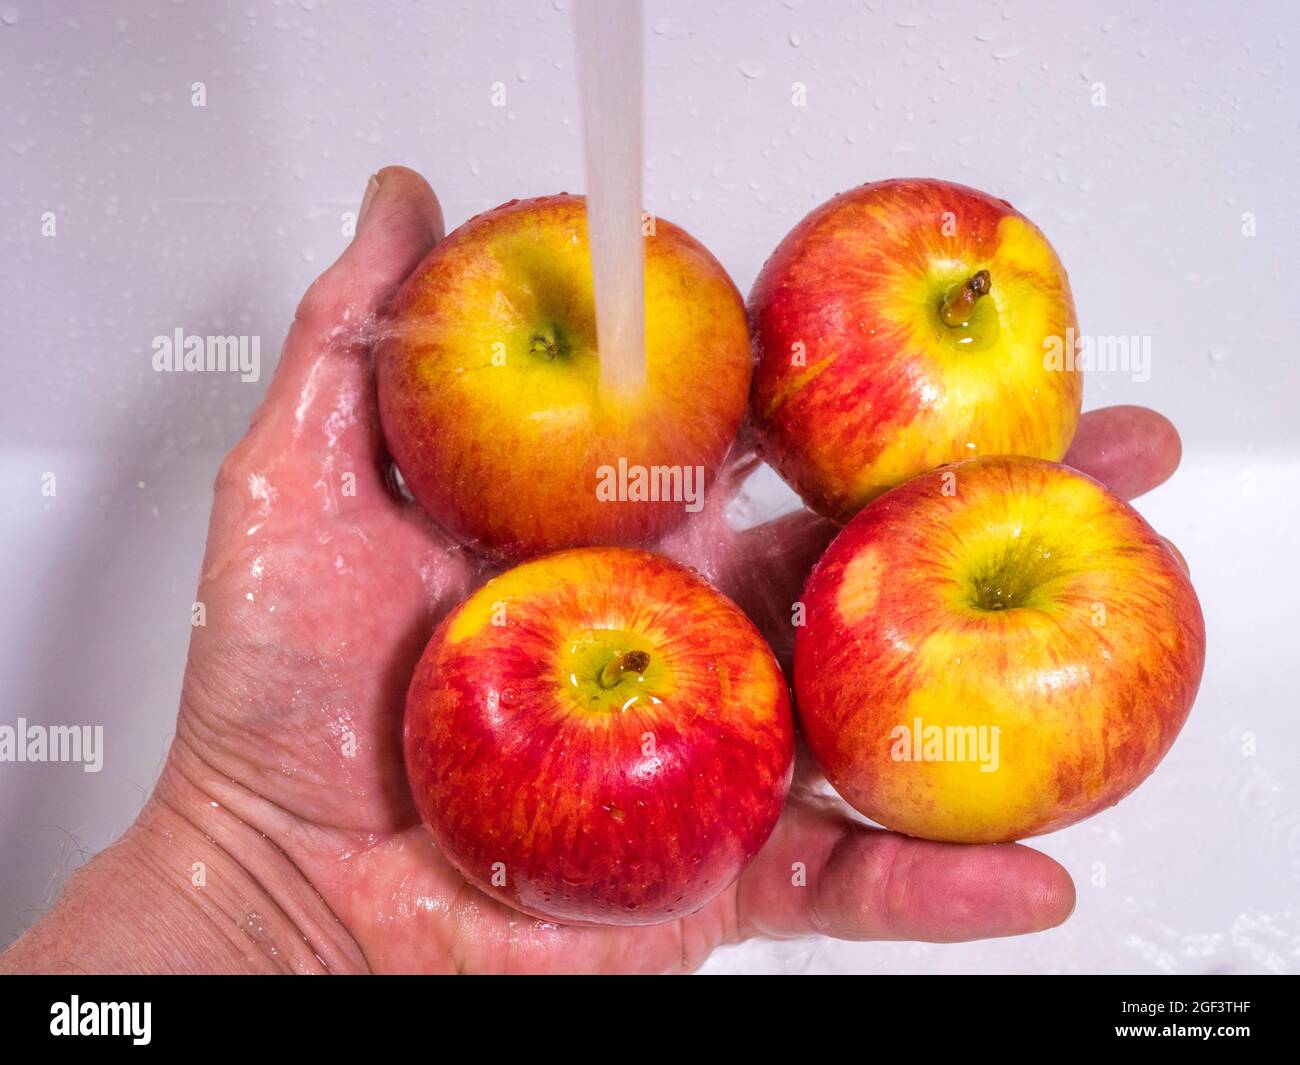 Closeup POV shot of a man’s hand holding four red and yellow whole apples under a running sink tap to wash them before eating. Stock Photo